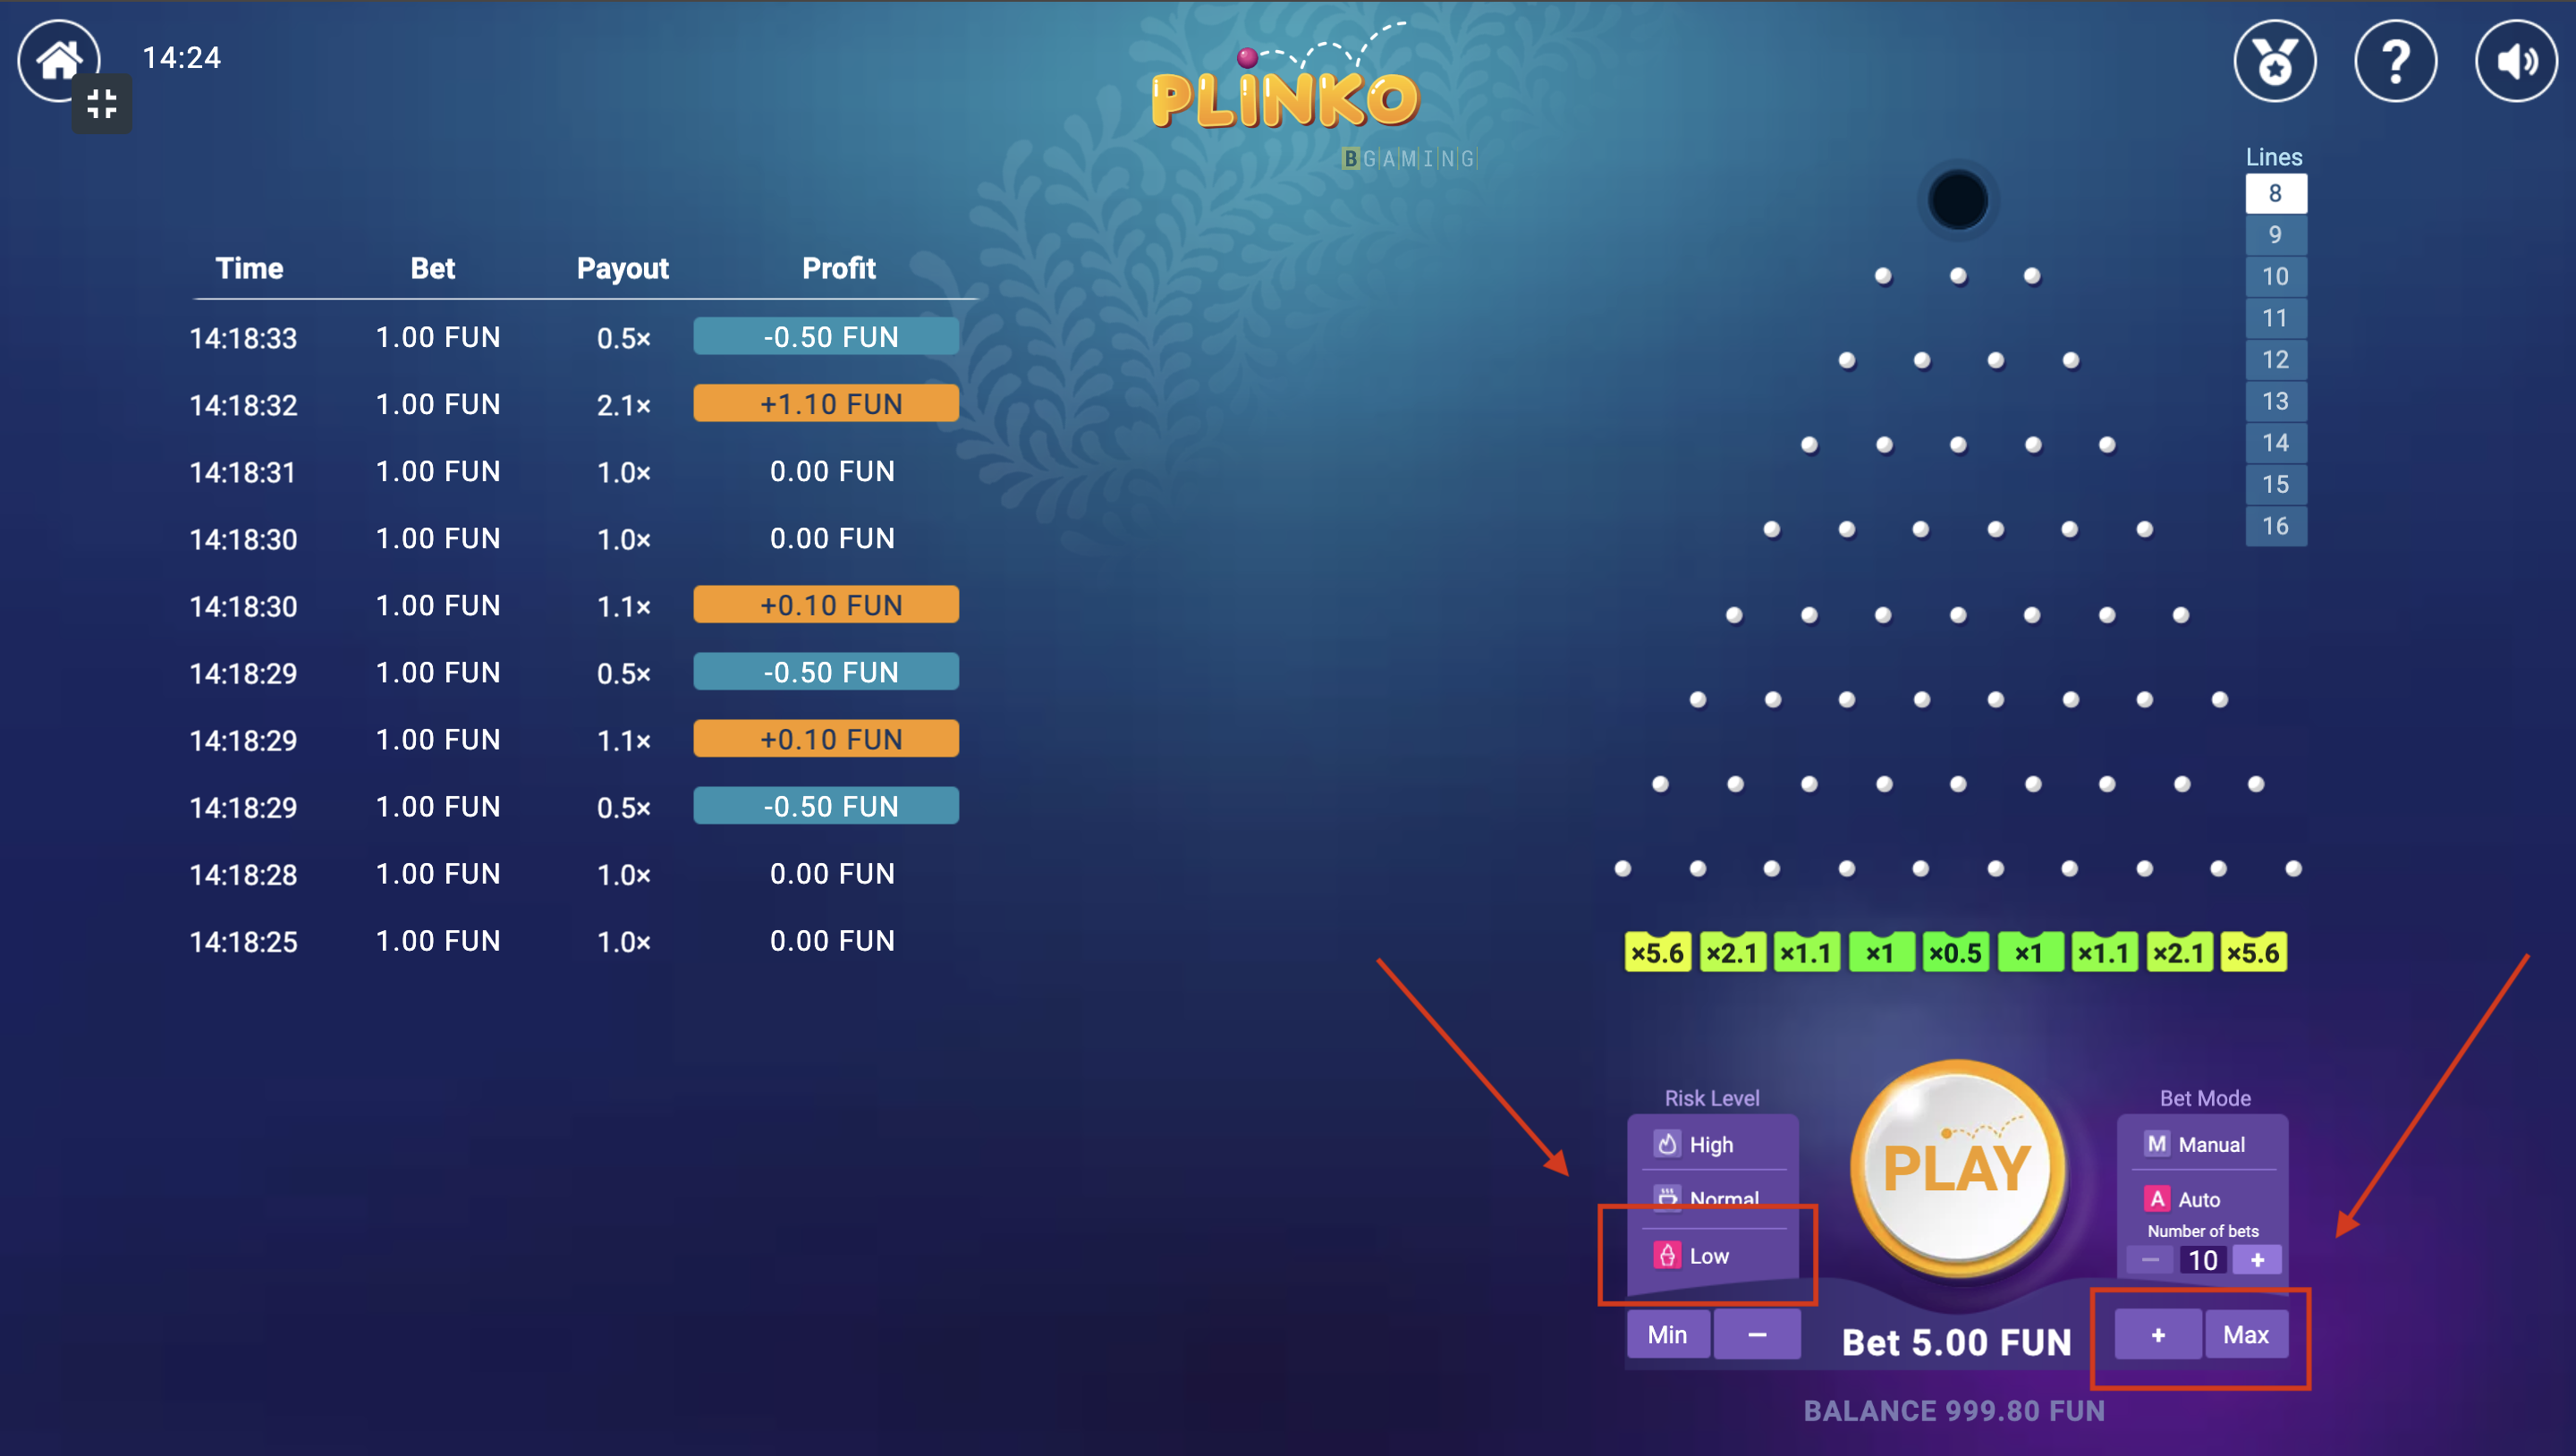 Plinko Game online | What's the strategy behind high stakes, low risk? 